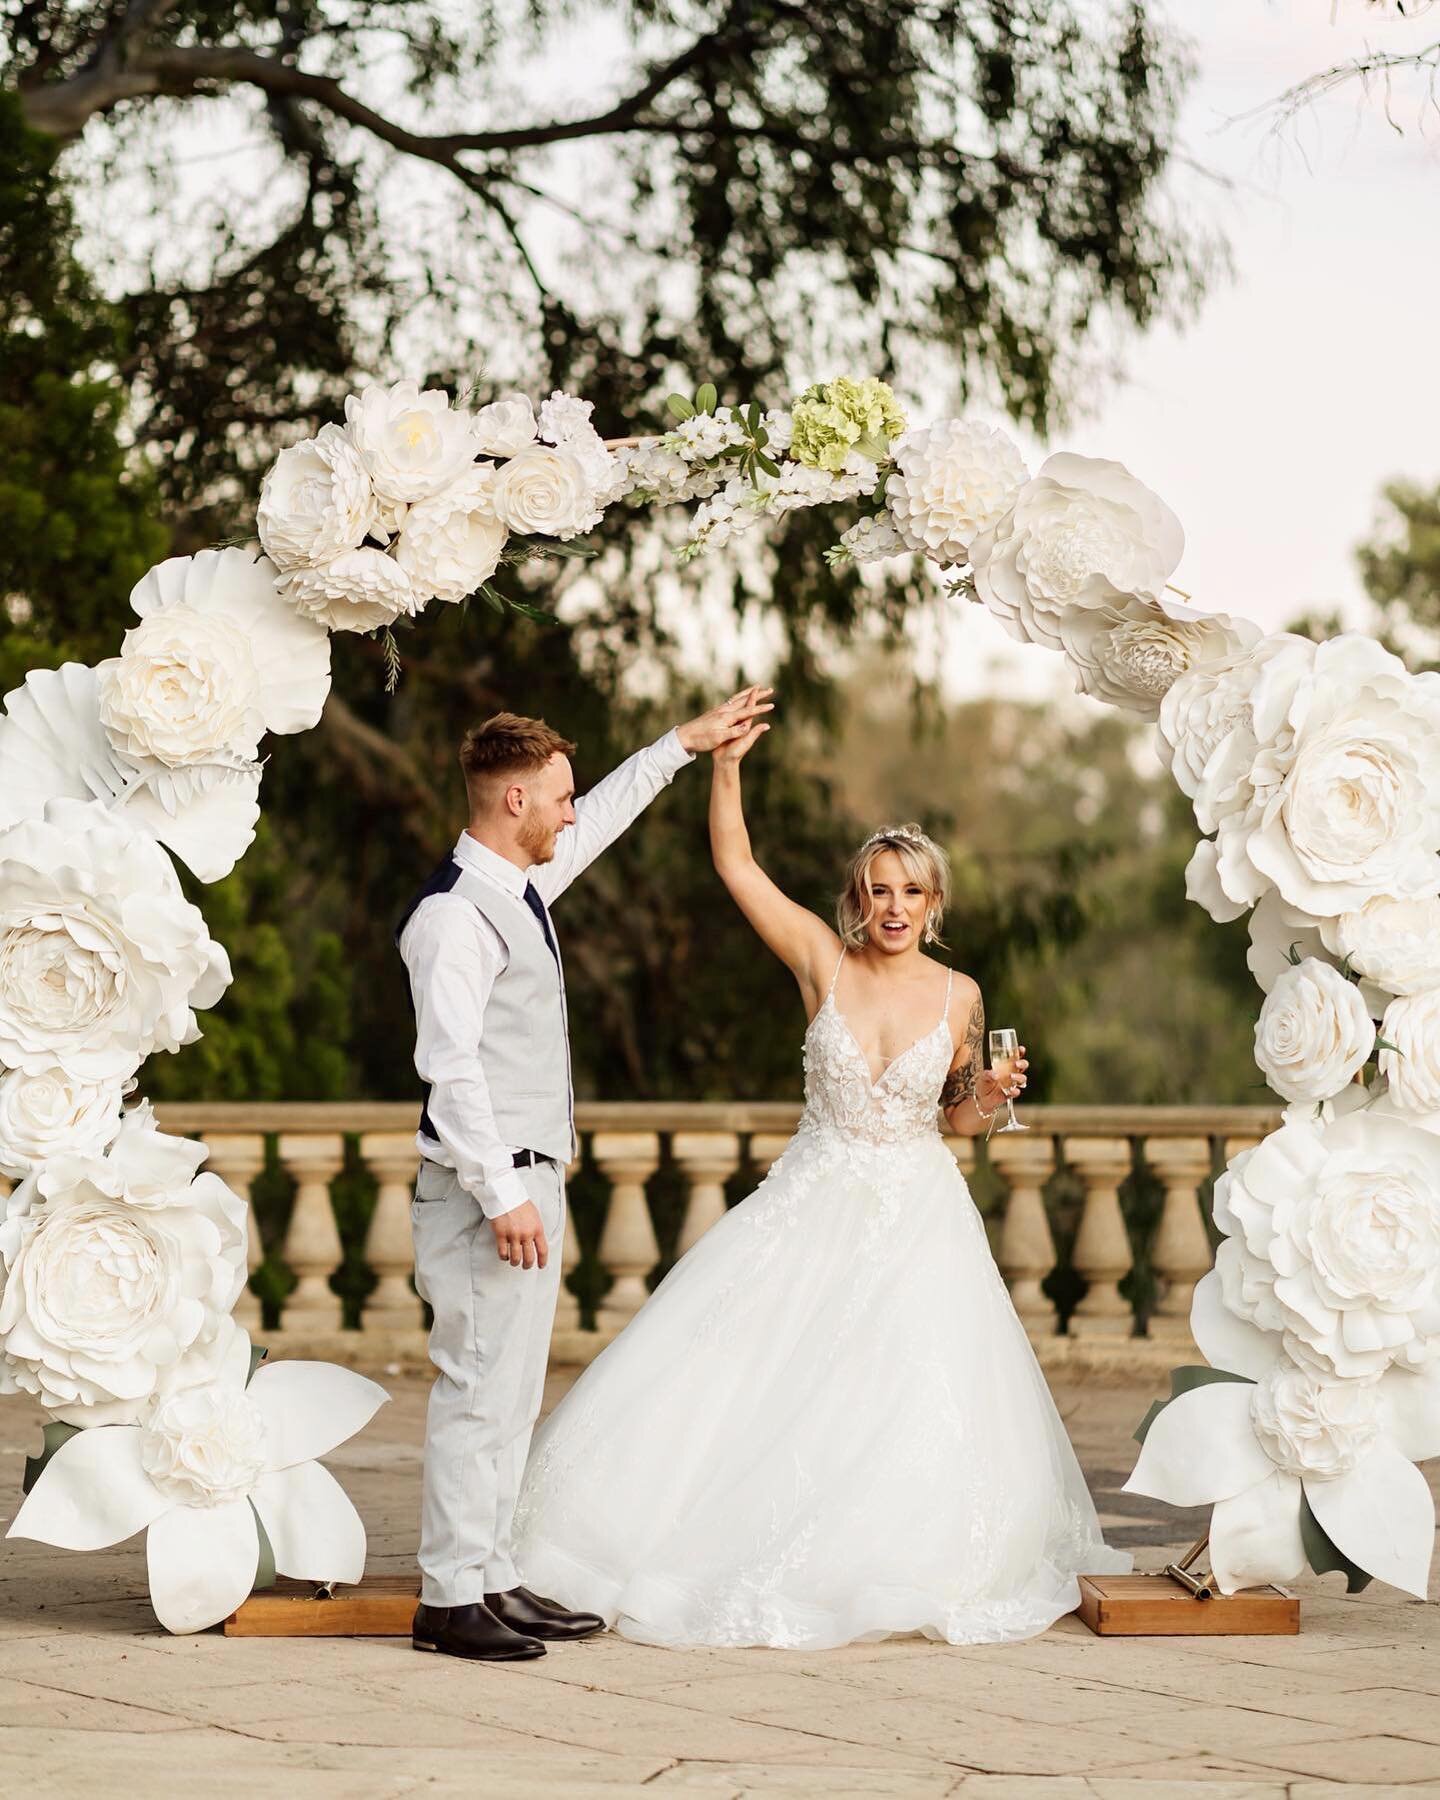 Sammie + Wade + those ginormous white flowers = absolute perfection ✨